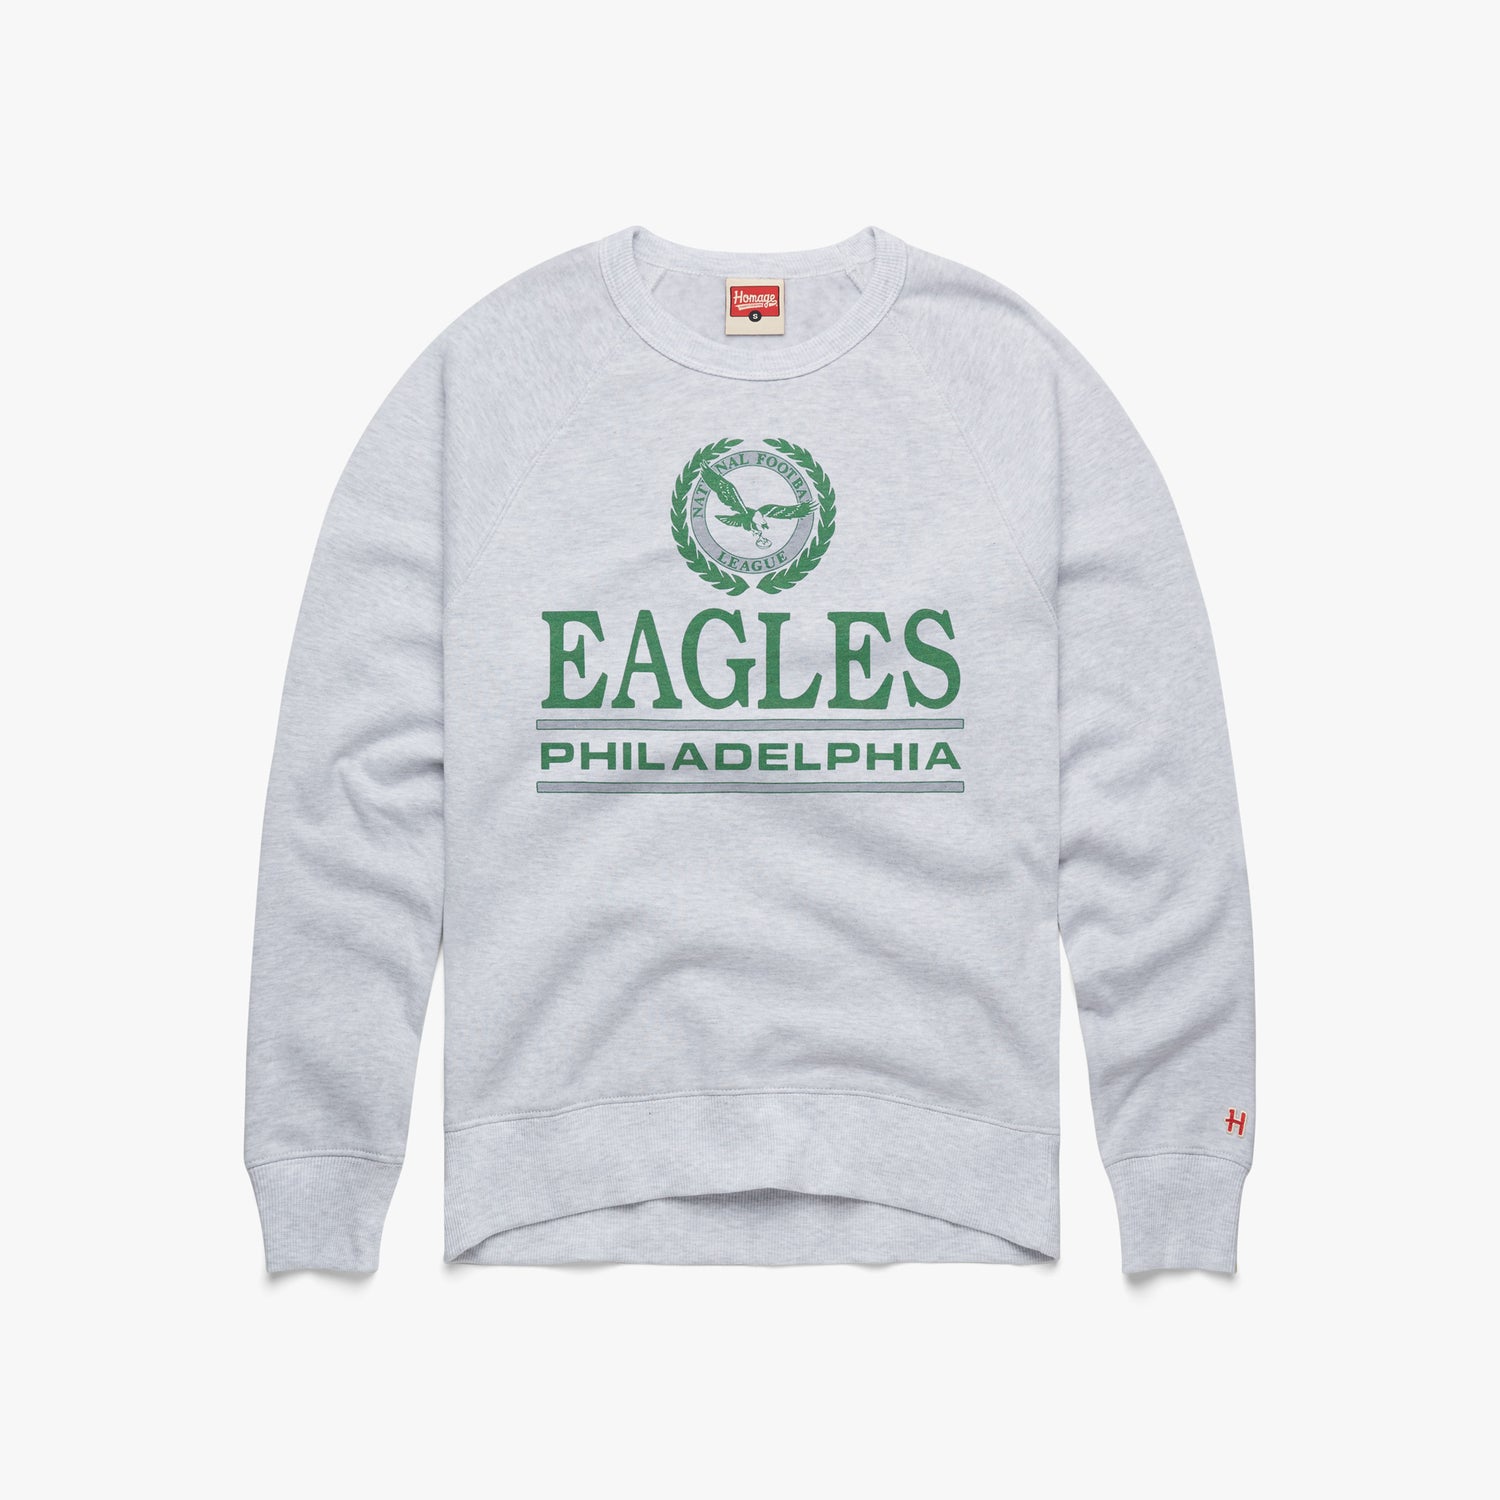 Philadelphia Eagles Crest Crewneck | Kelly Green Eagles Apparel from Homage. | Officially Licensed NFL Apparel from Homage Pro Shop.